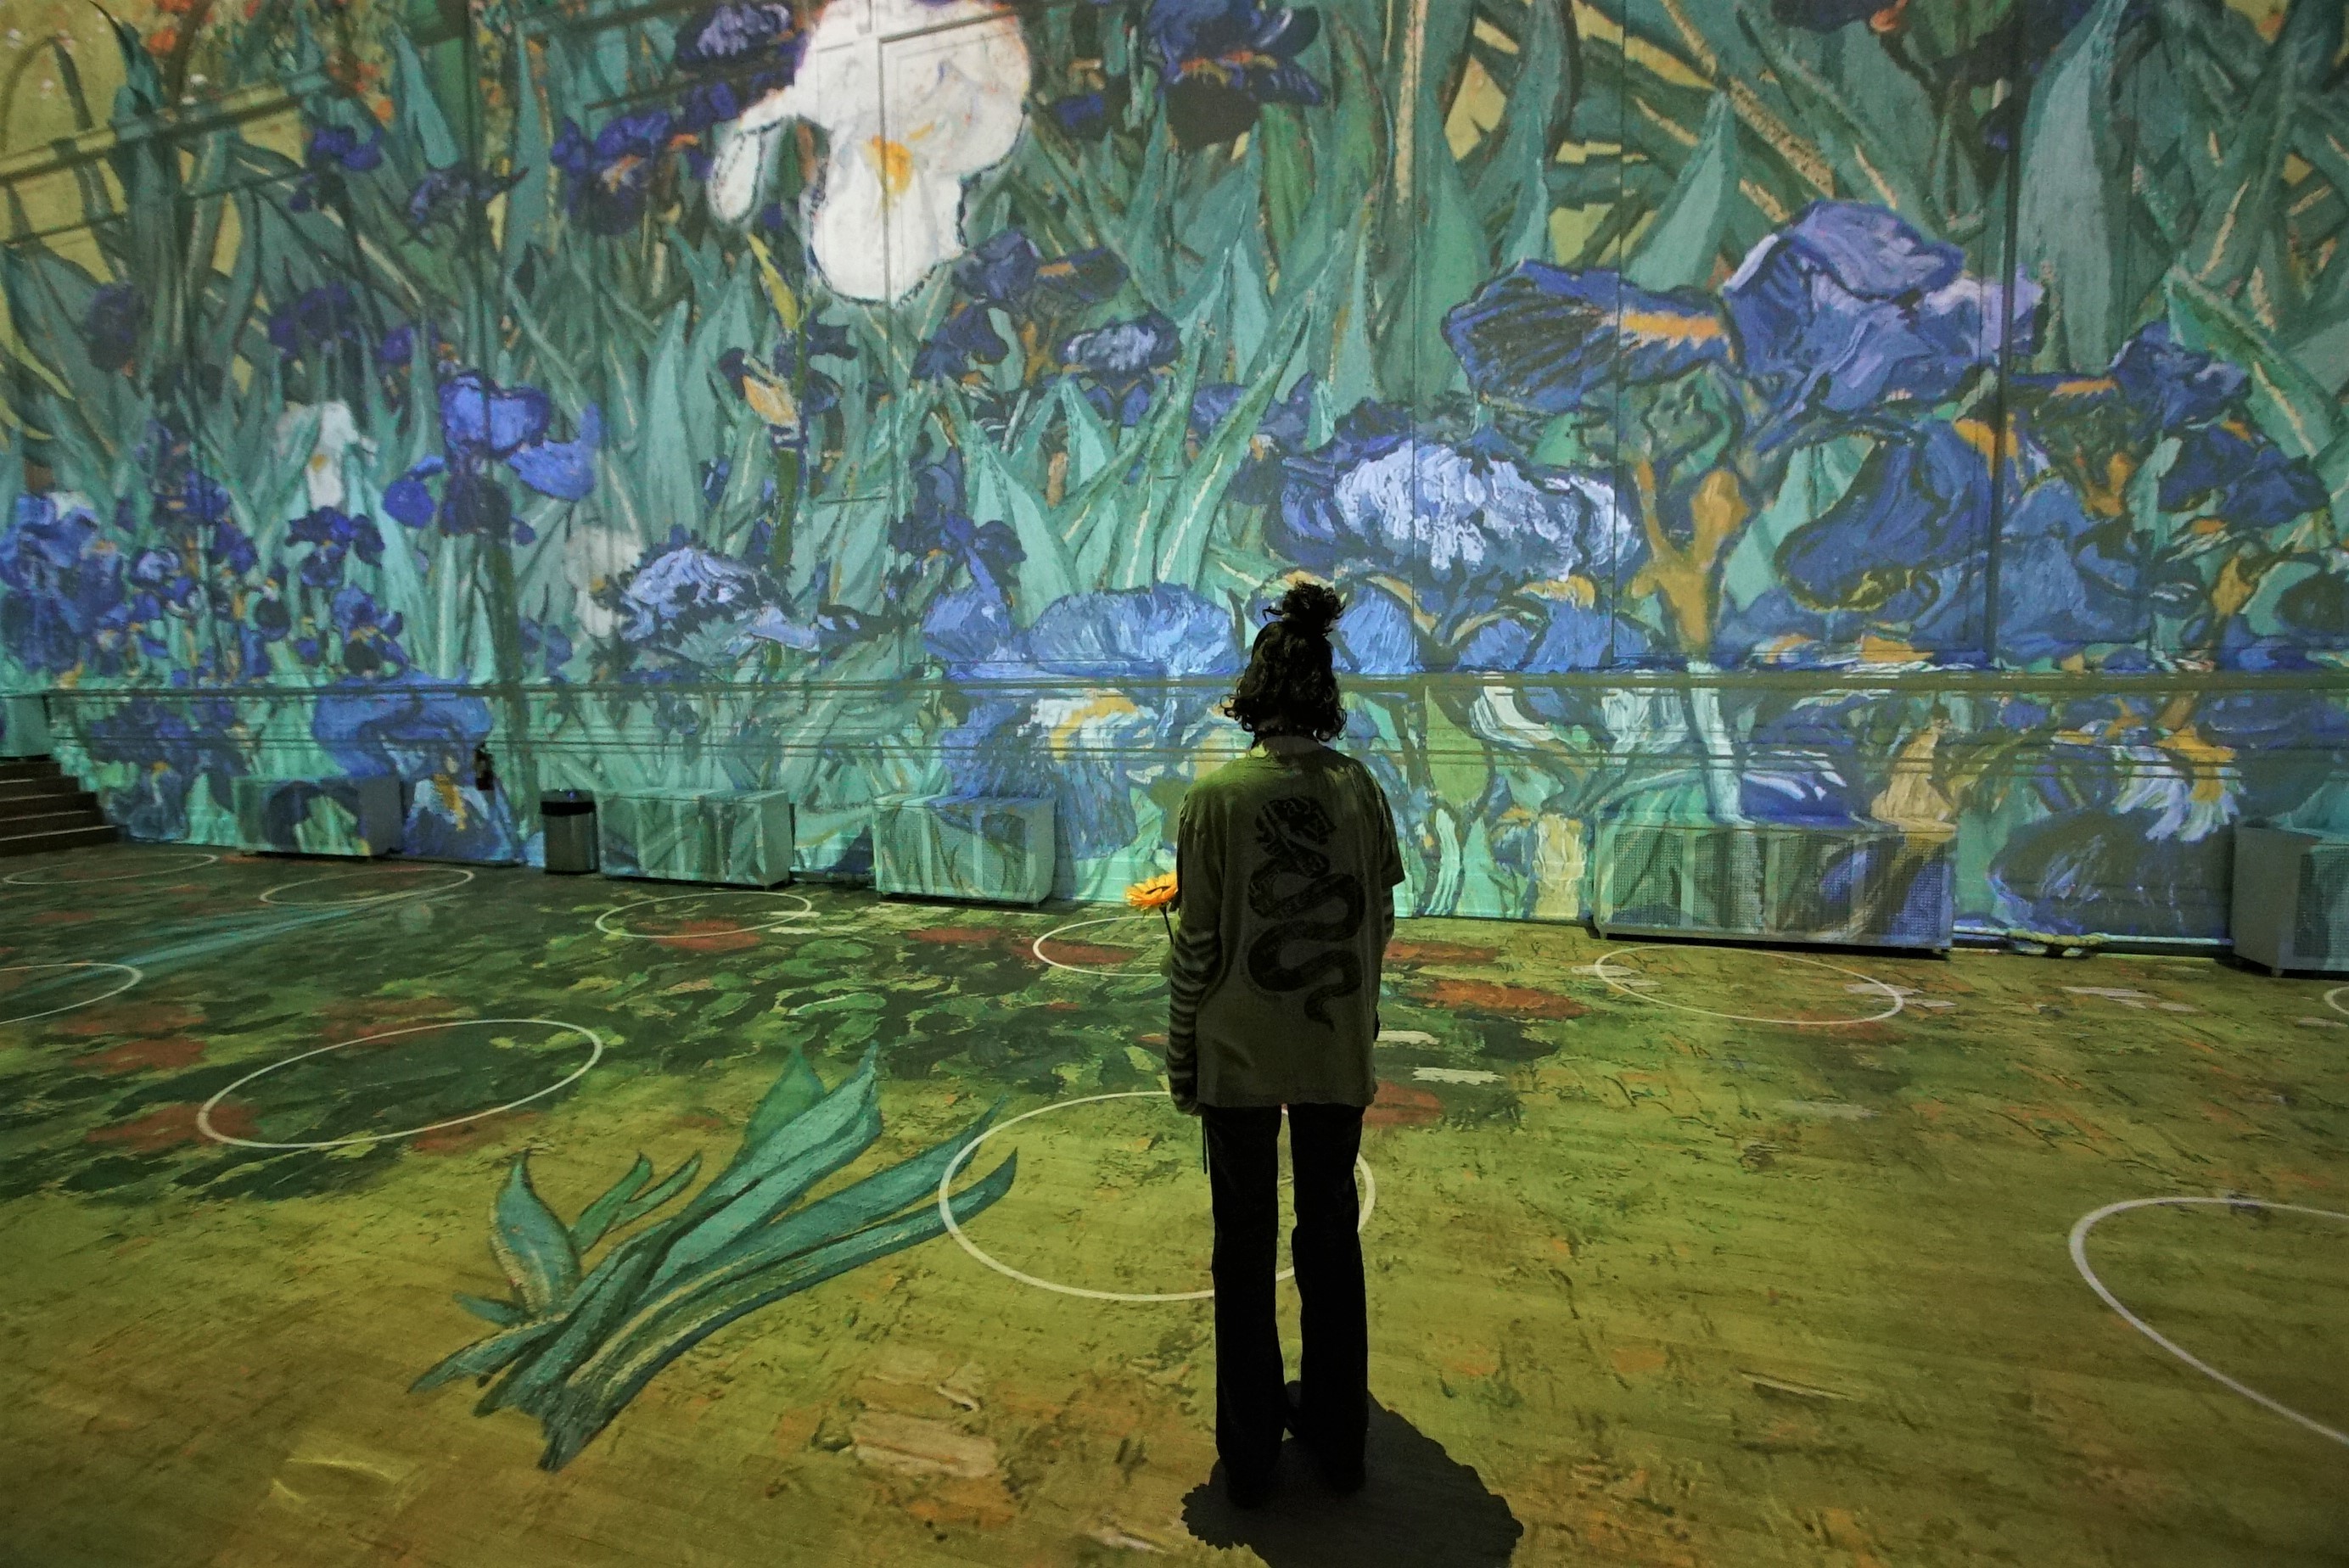 Here's what it's like to visit Chicago's "Immersive Van Gogh"